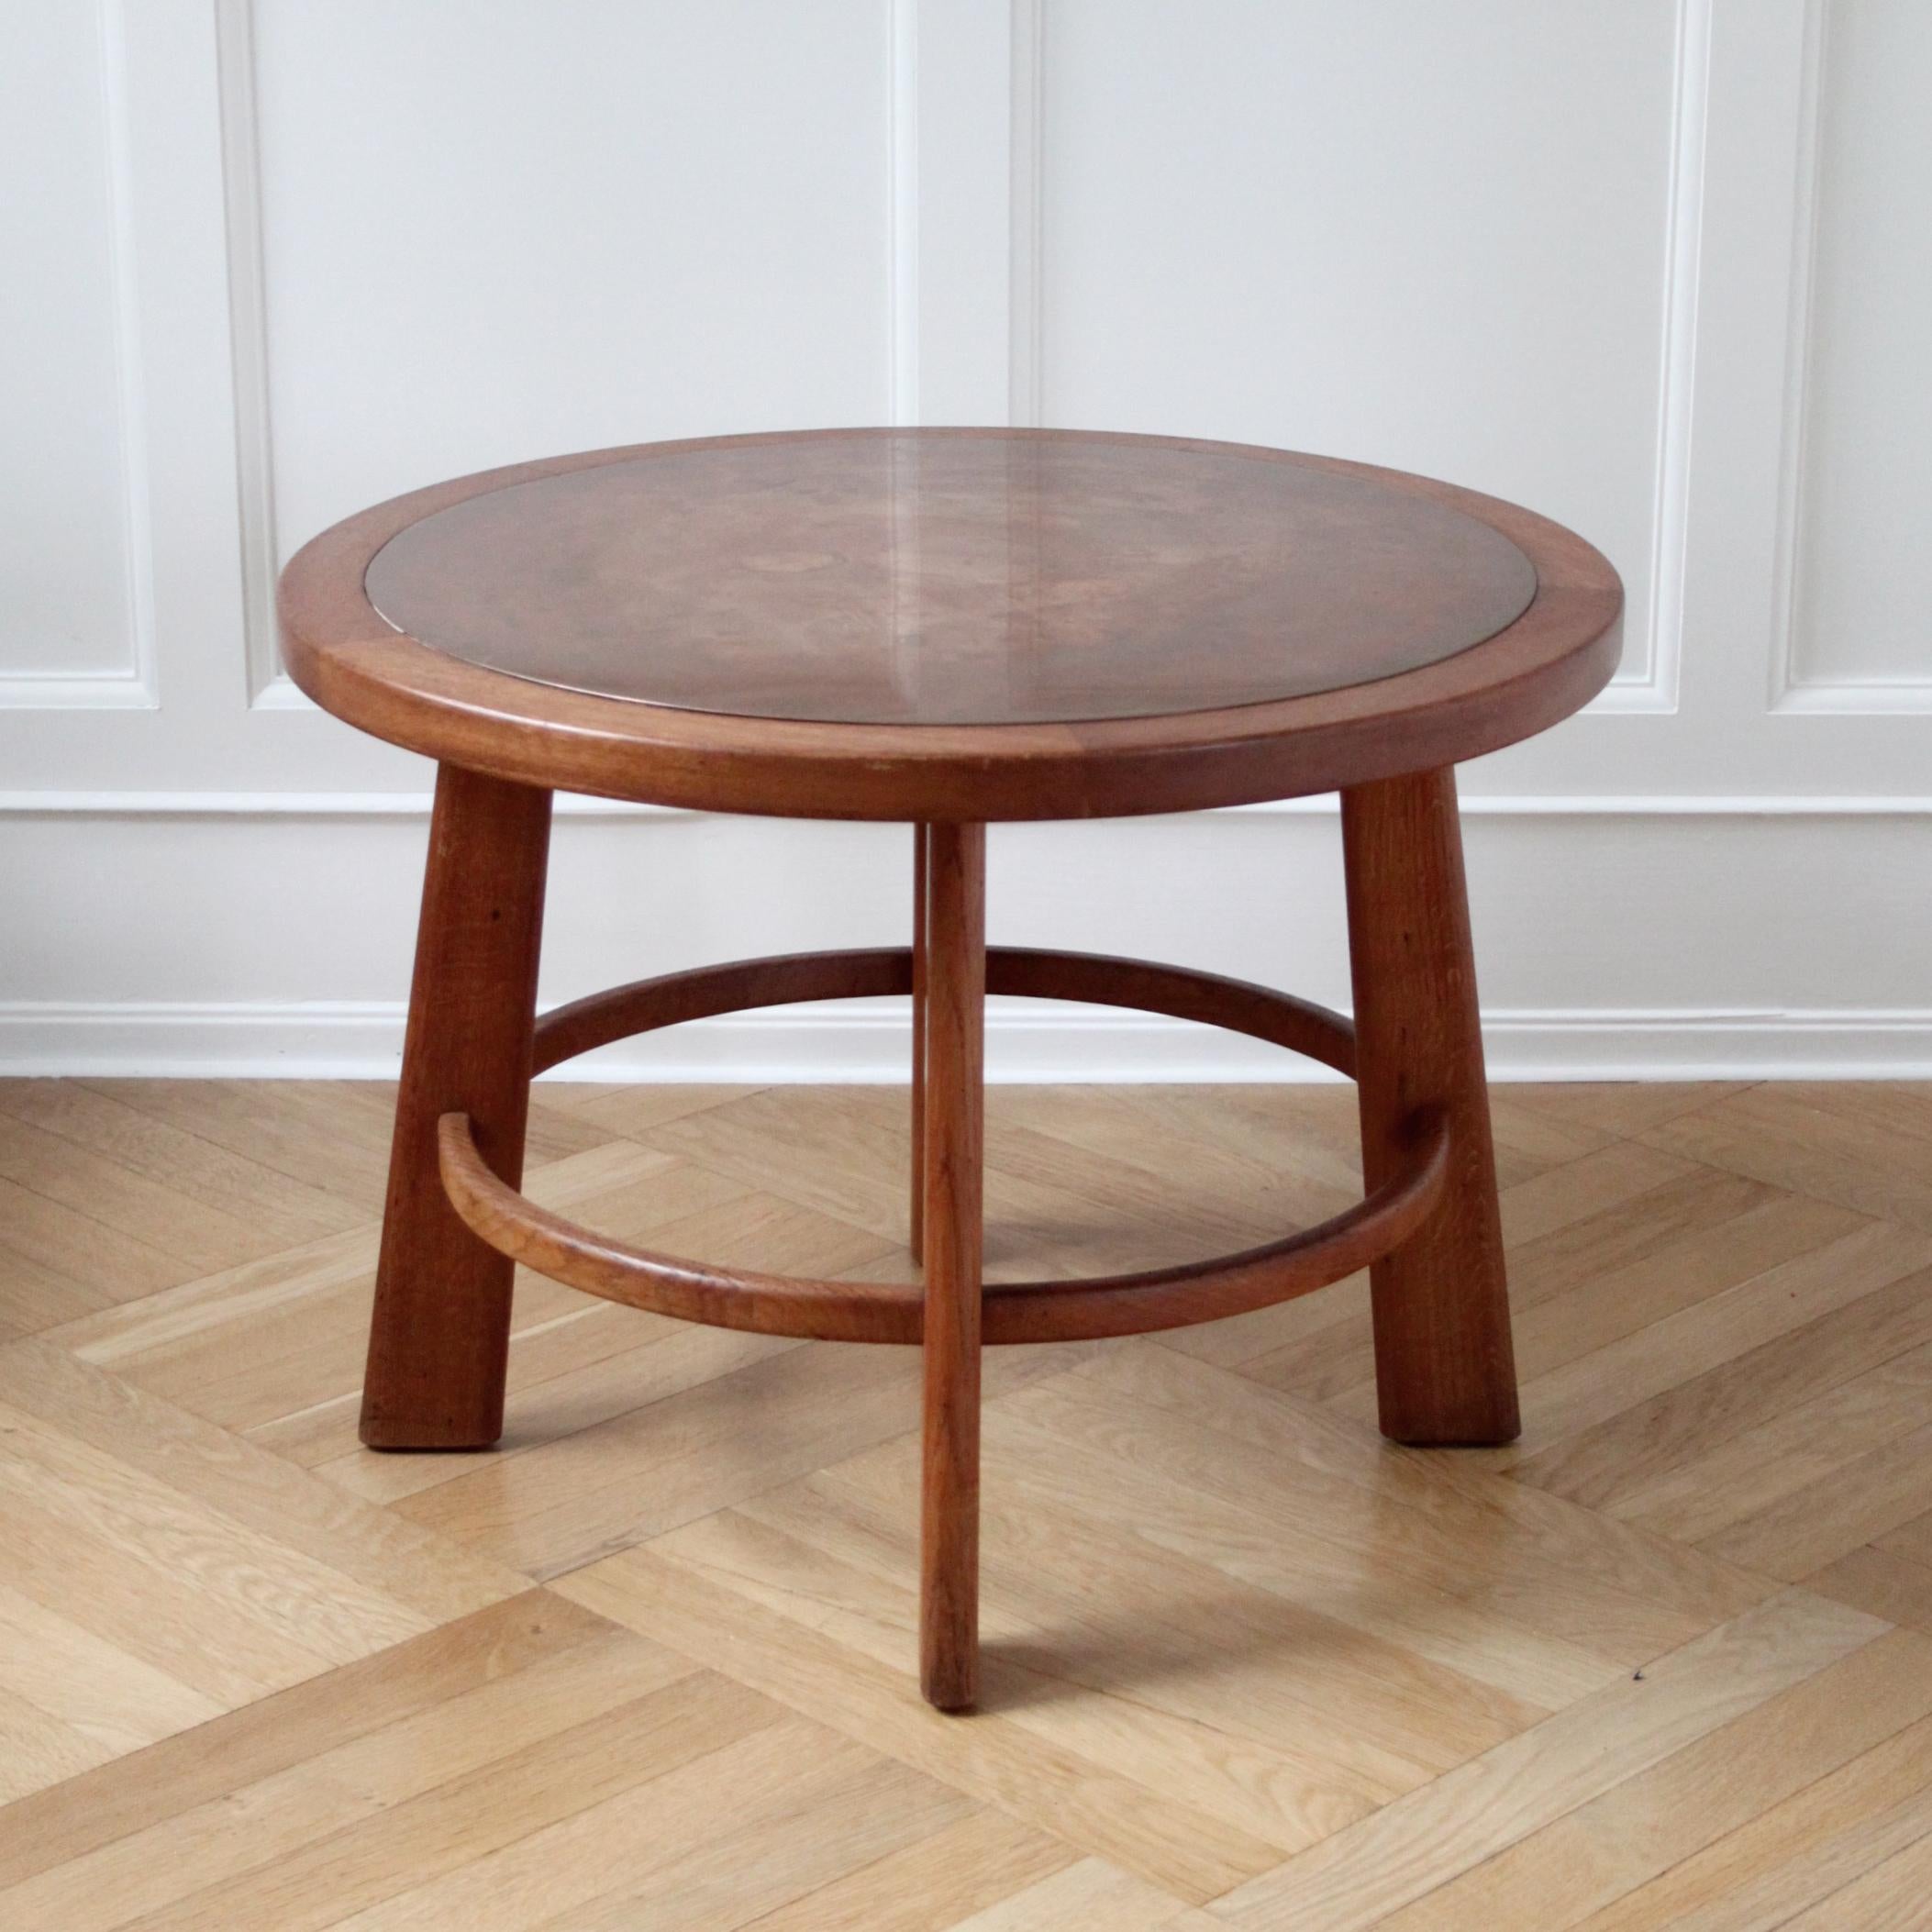 Danish Otto Færge Coffee Table in Oak and Copper, Denmark 1940s